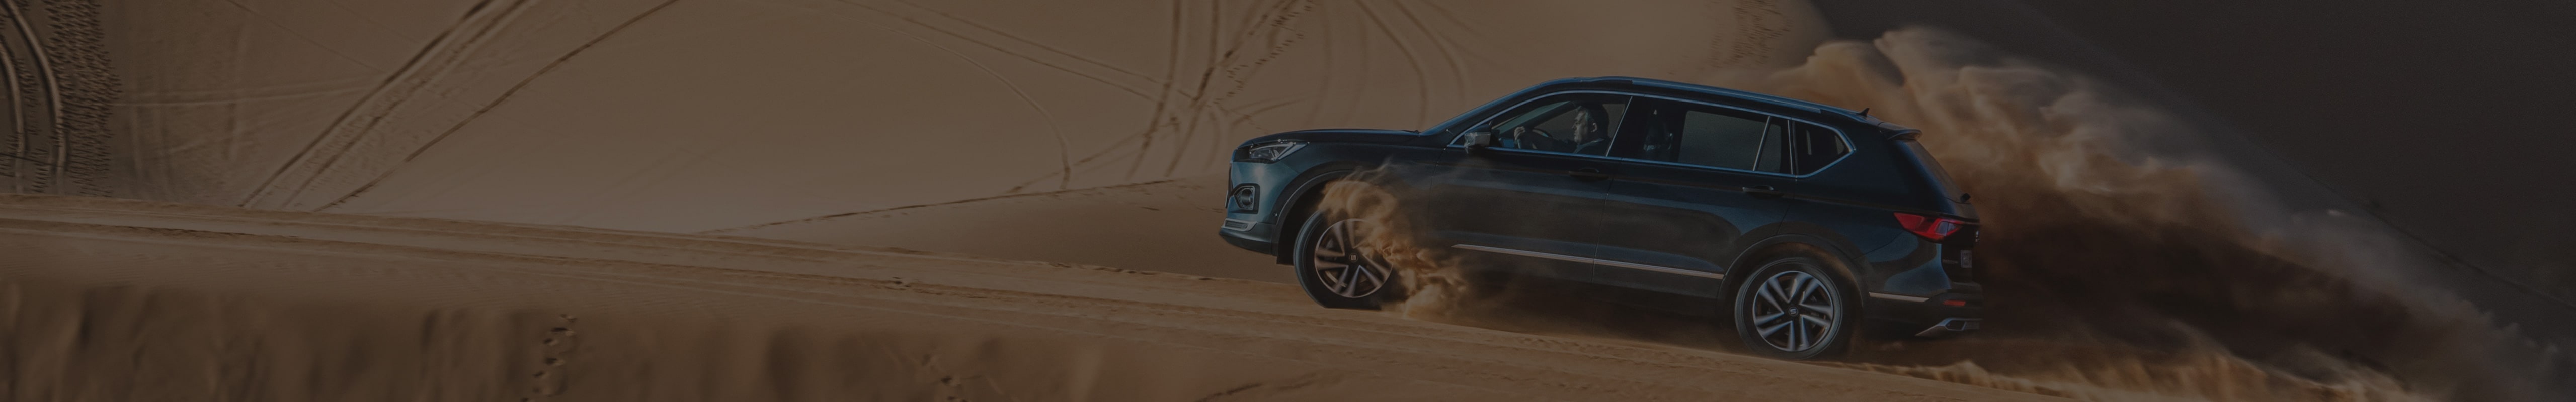 SEAT Tarraco Surfing in the desert